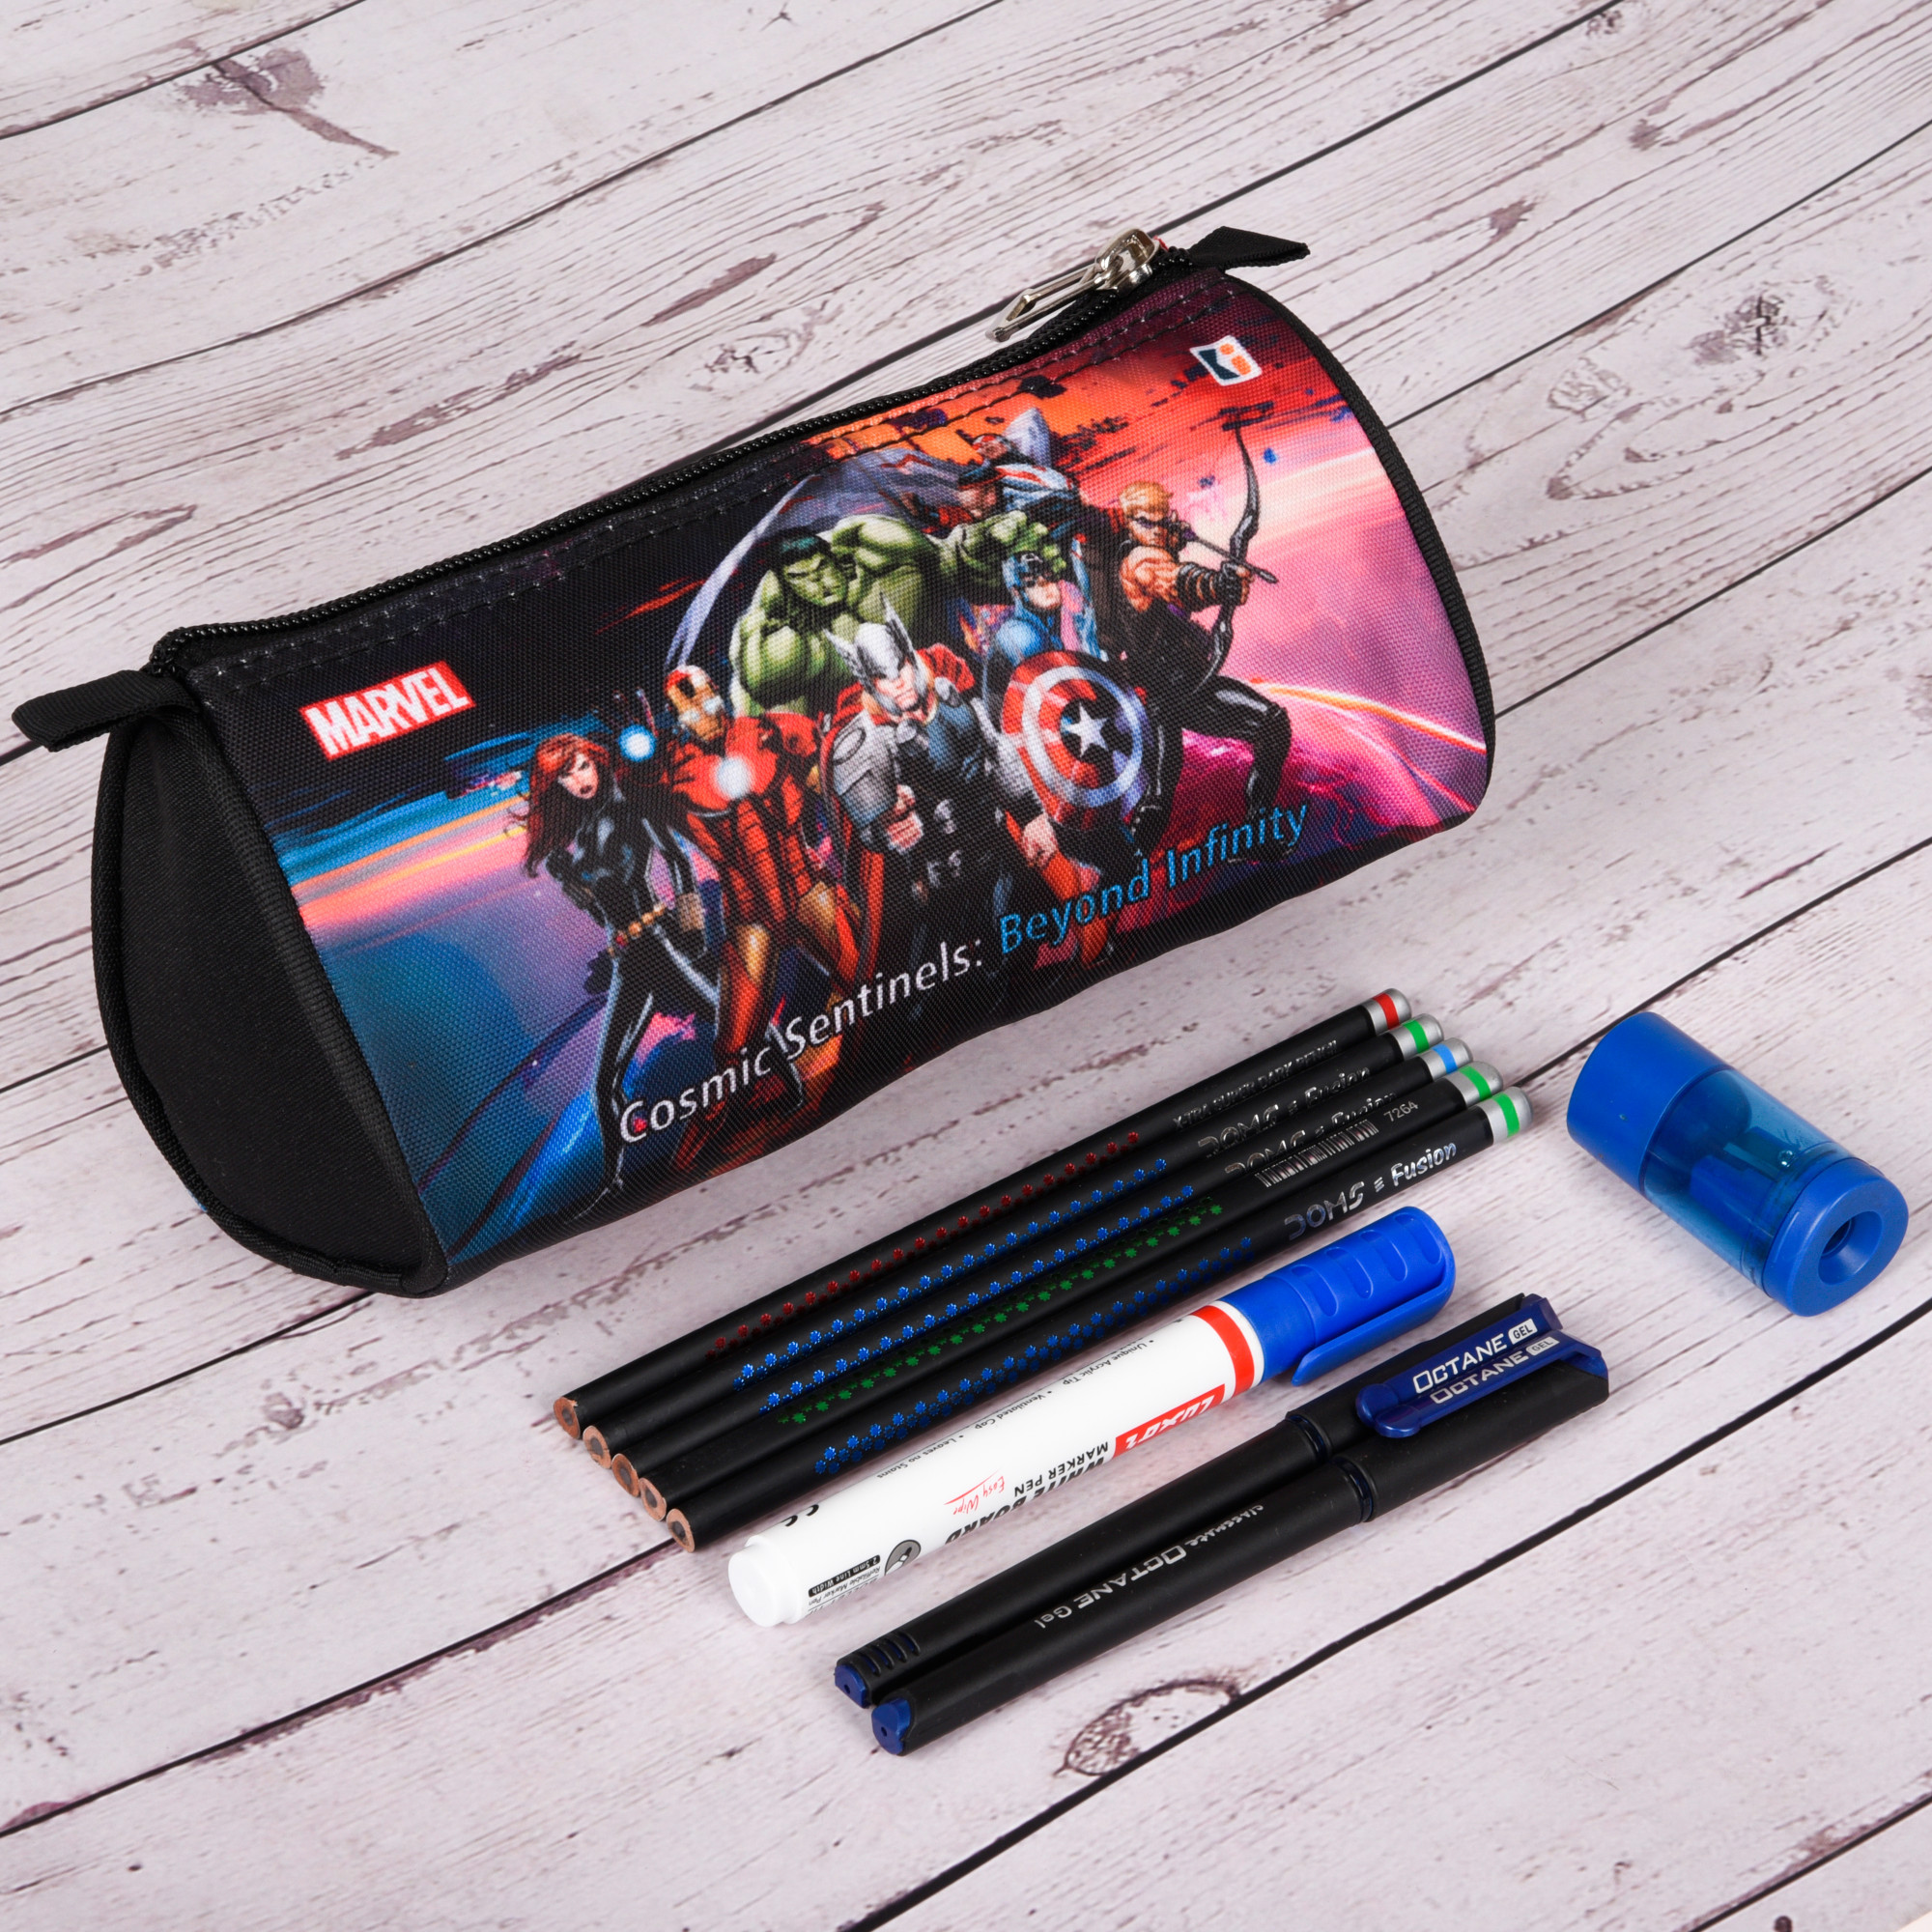 Kuber Industries Pencil Pouch | Multi-Purpose Travel Pouch | Kids Stationary Storage Bag | Pencil Utility School Pouches | Geometry Box | Marvel Avengers | Large | Black